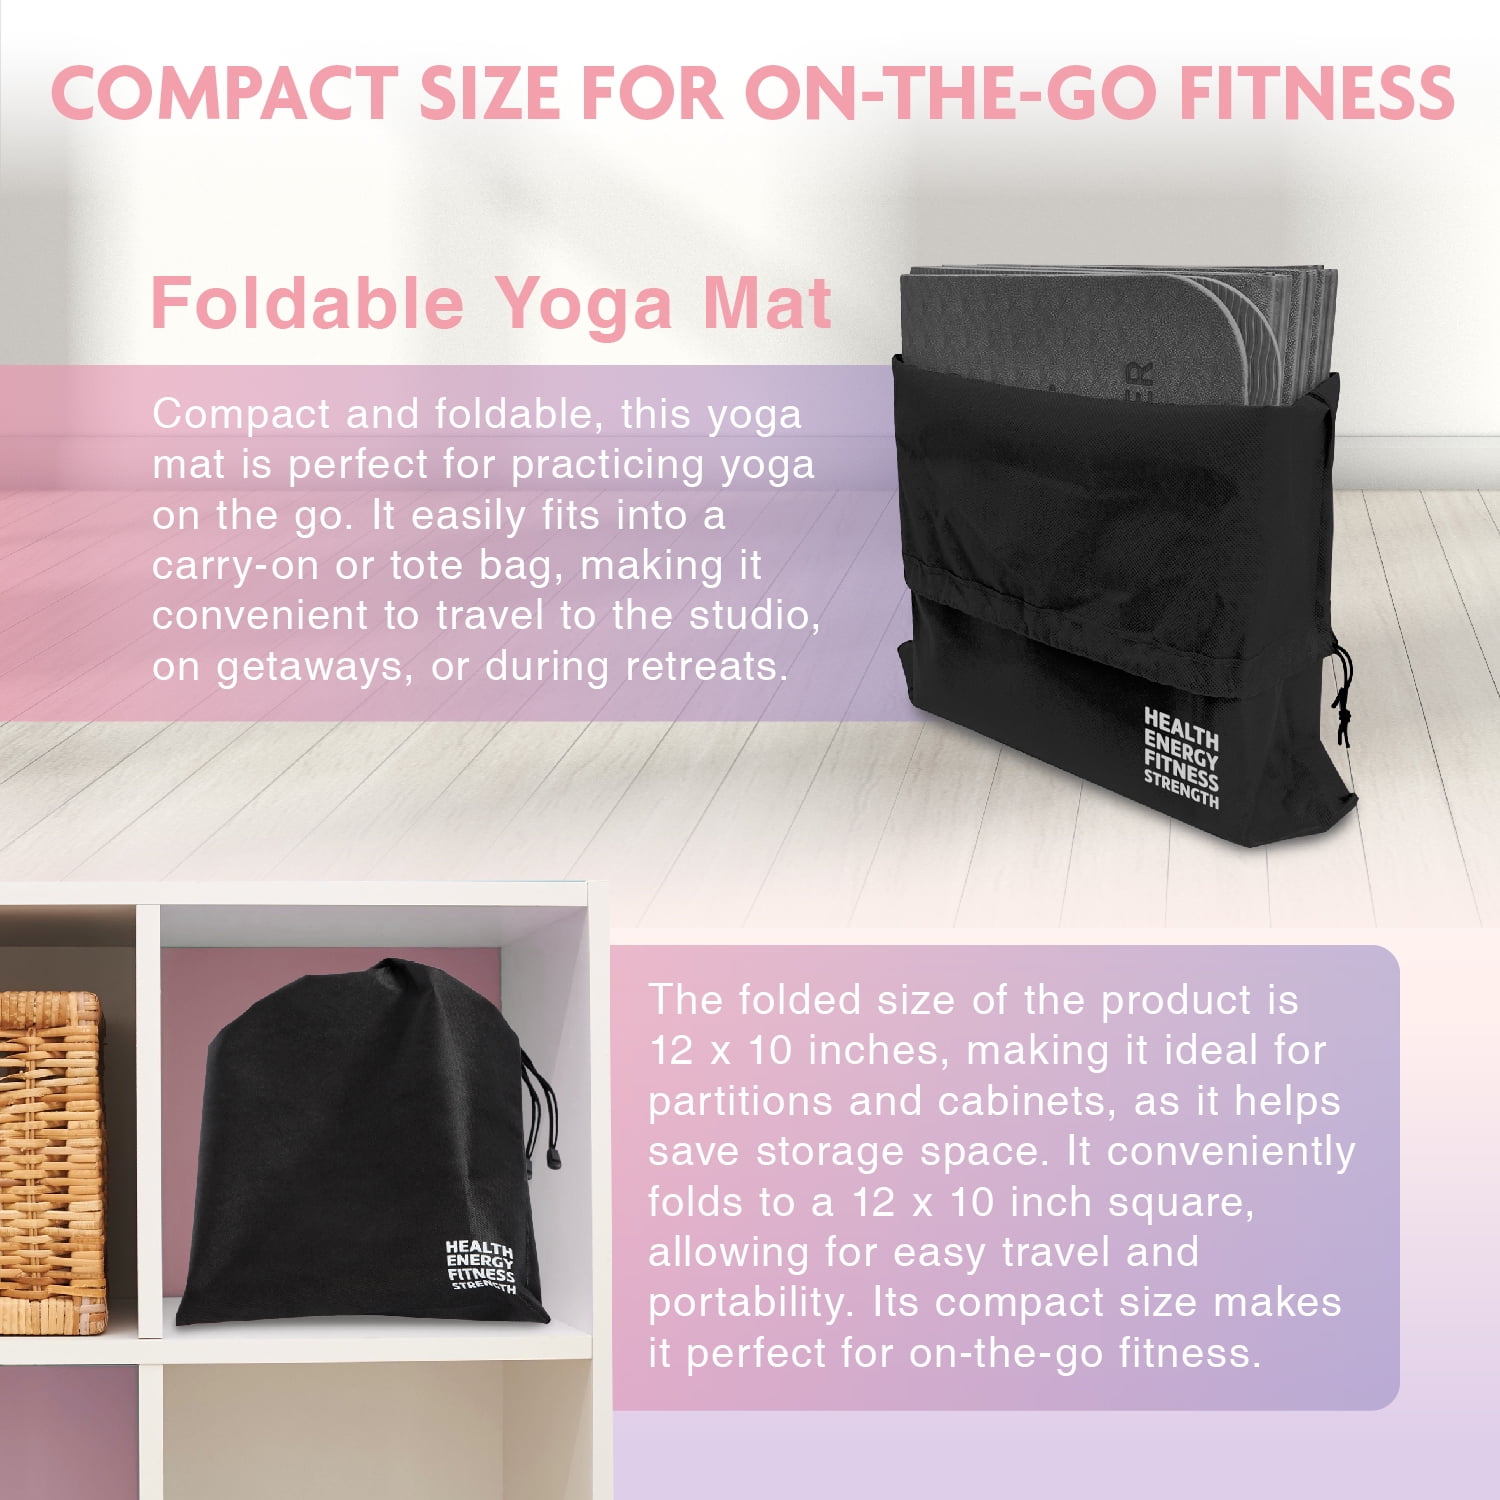 Foldable Yoga Mat - Illustrated 14 Embossed Poses, Square Folding Travel  Firness & Exercise Mat as seen on TV, Perfect Storage, Pilates, Home Workout